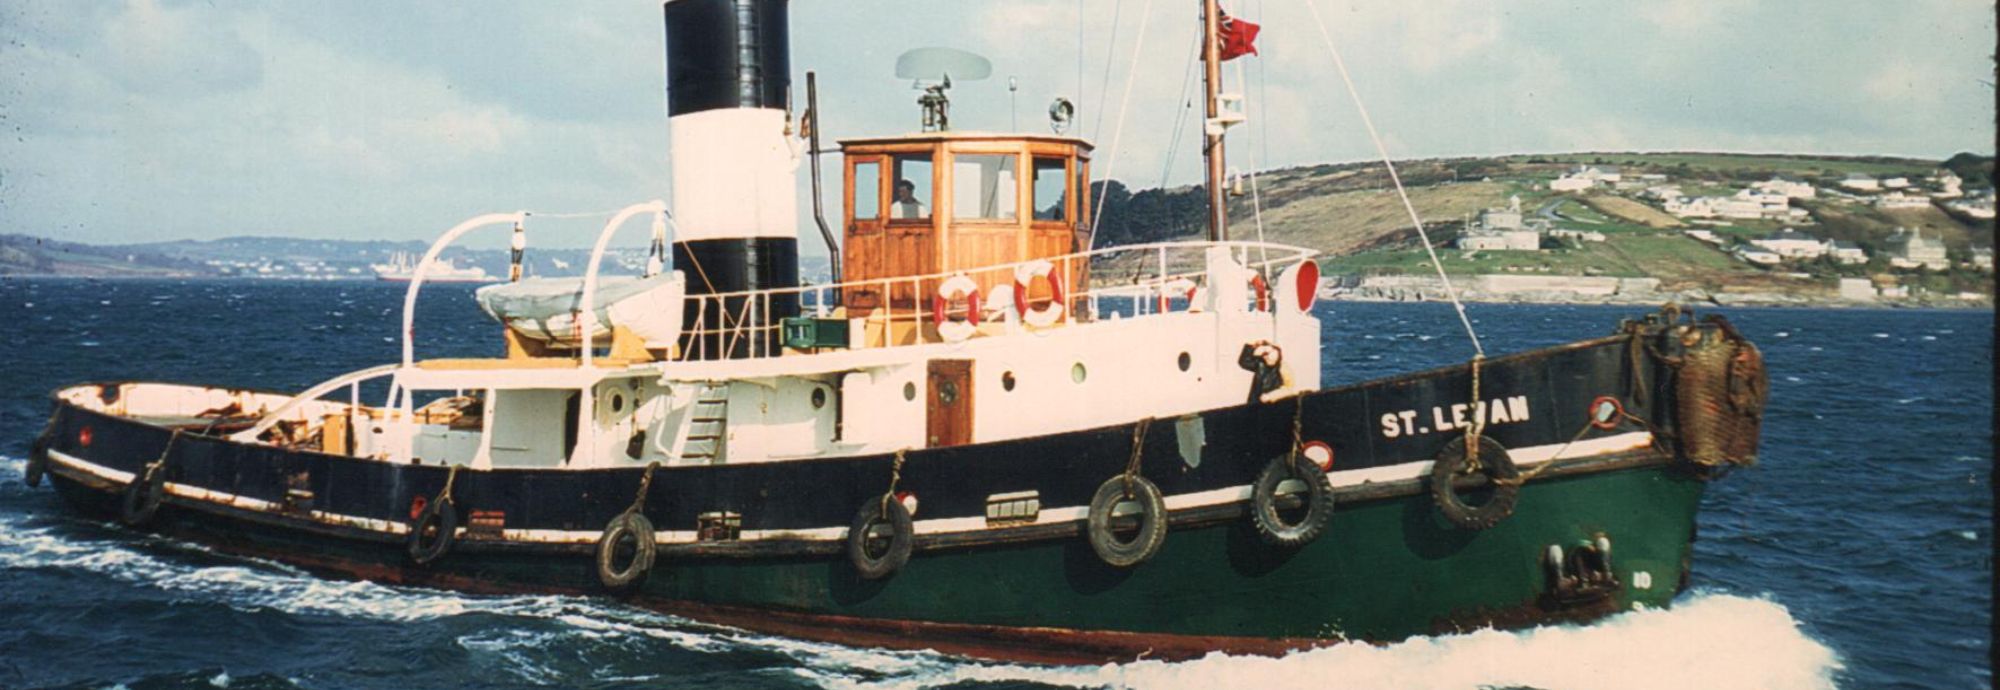 Falmouth tug St Levan with St Mawes Castle in the background.